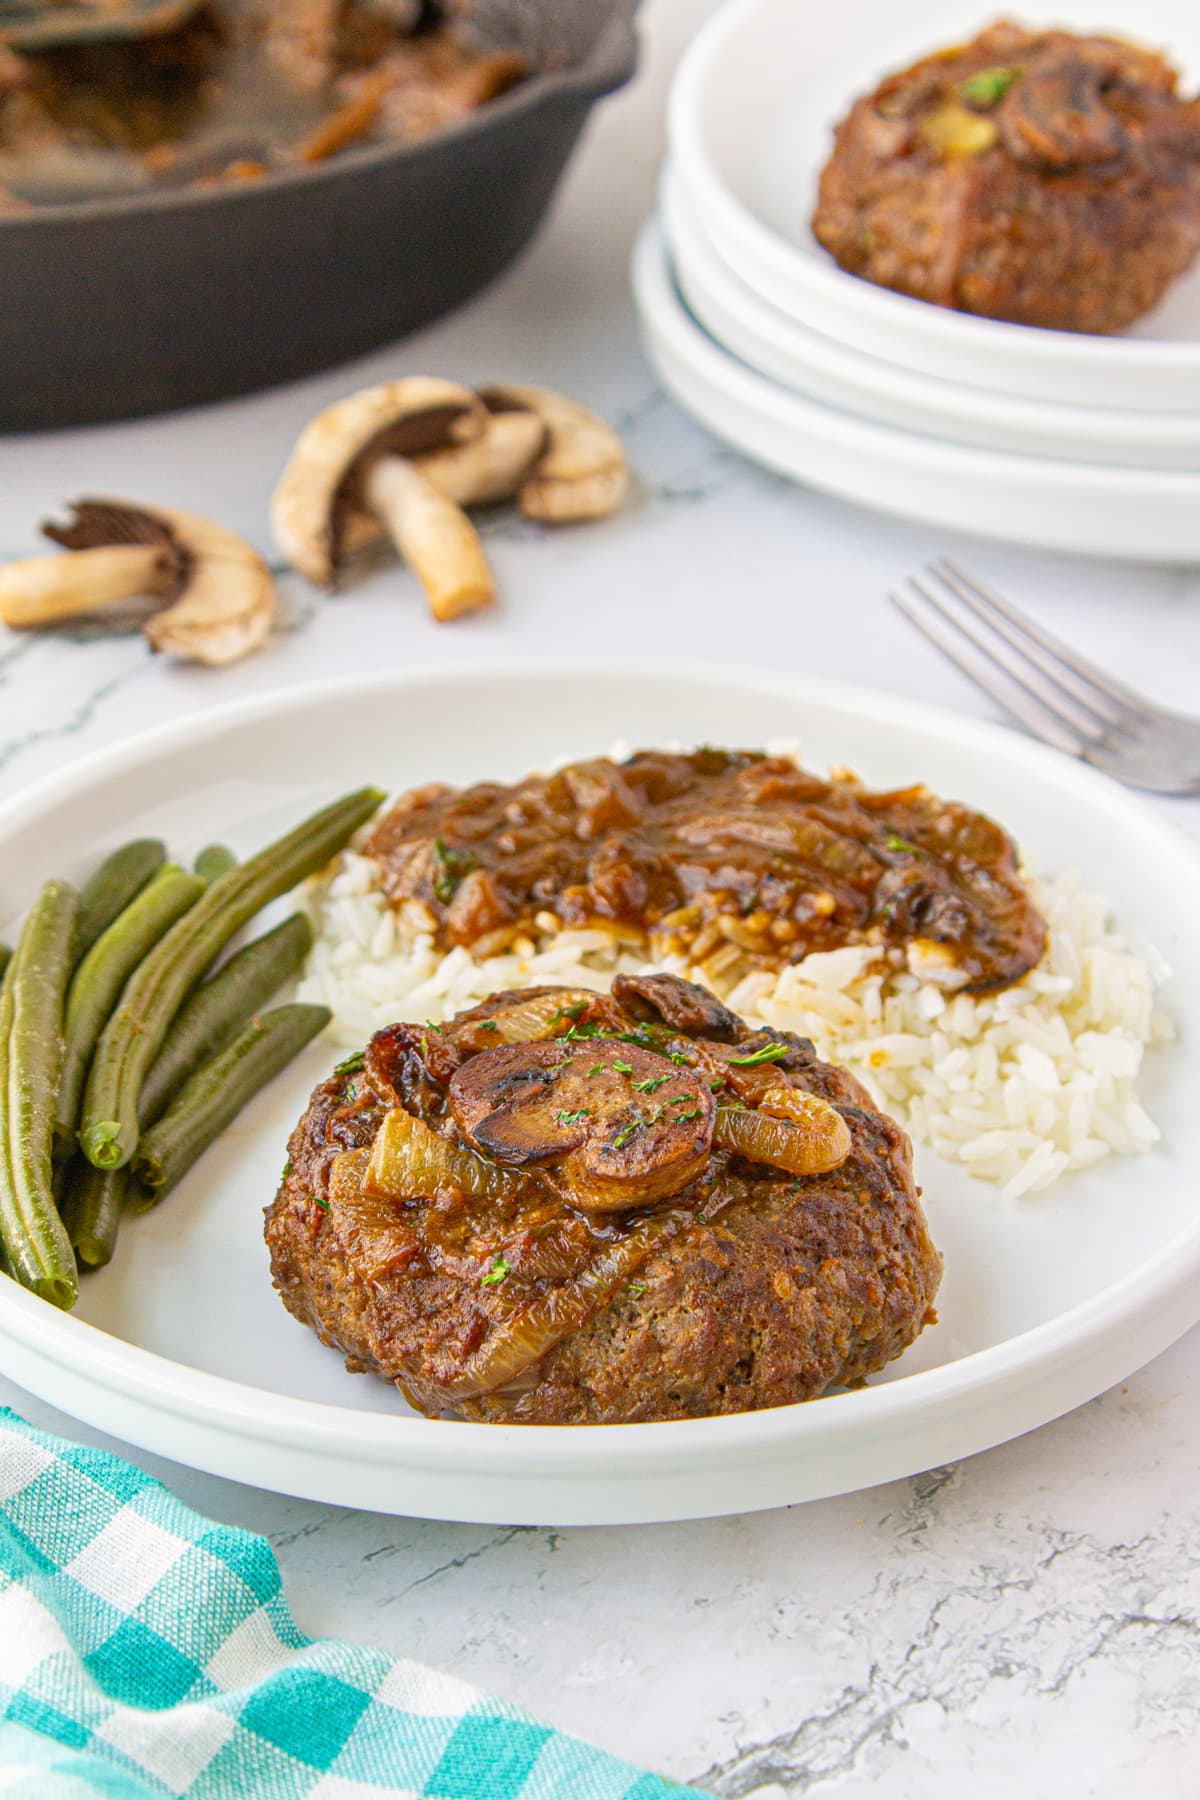 A full meal featuring Hamburger Steak on a plate.